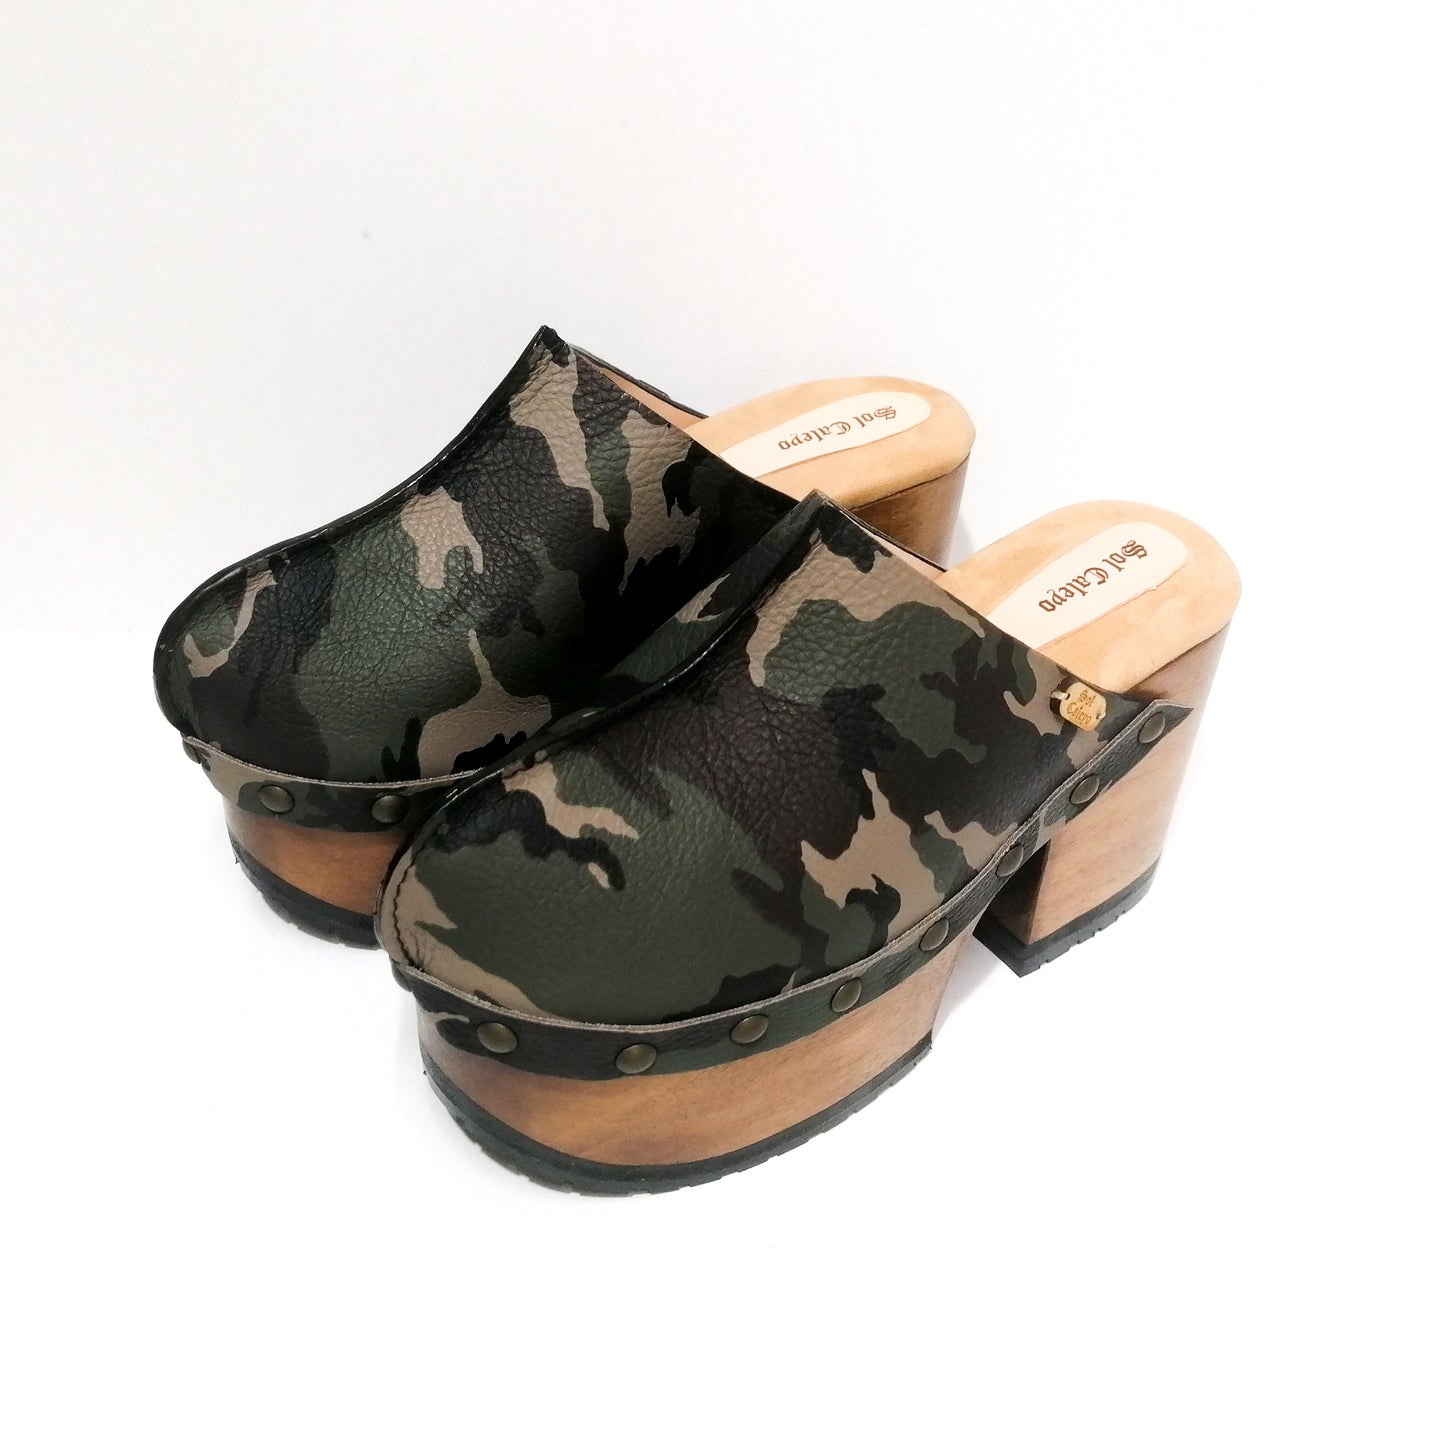 Military leather clogs. Leather clogs with wooden heel. Vintage style platform clogs. Sizes 34 to 47. Handmade leather shoes of excellent quality by Sol Caleyo. 